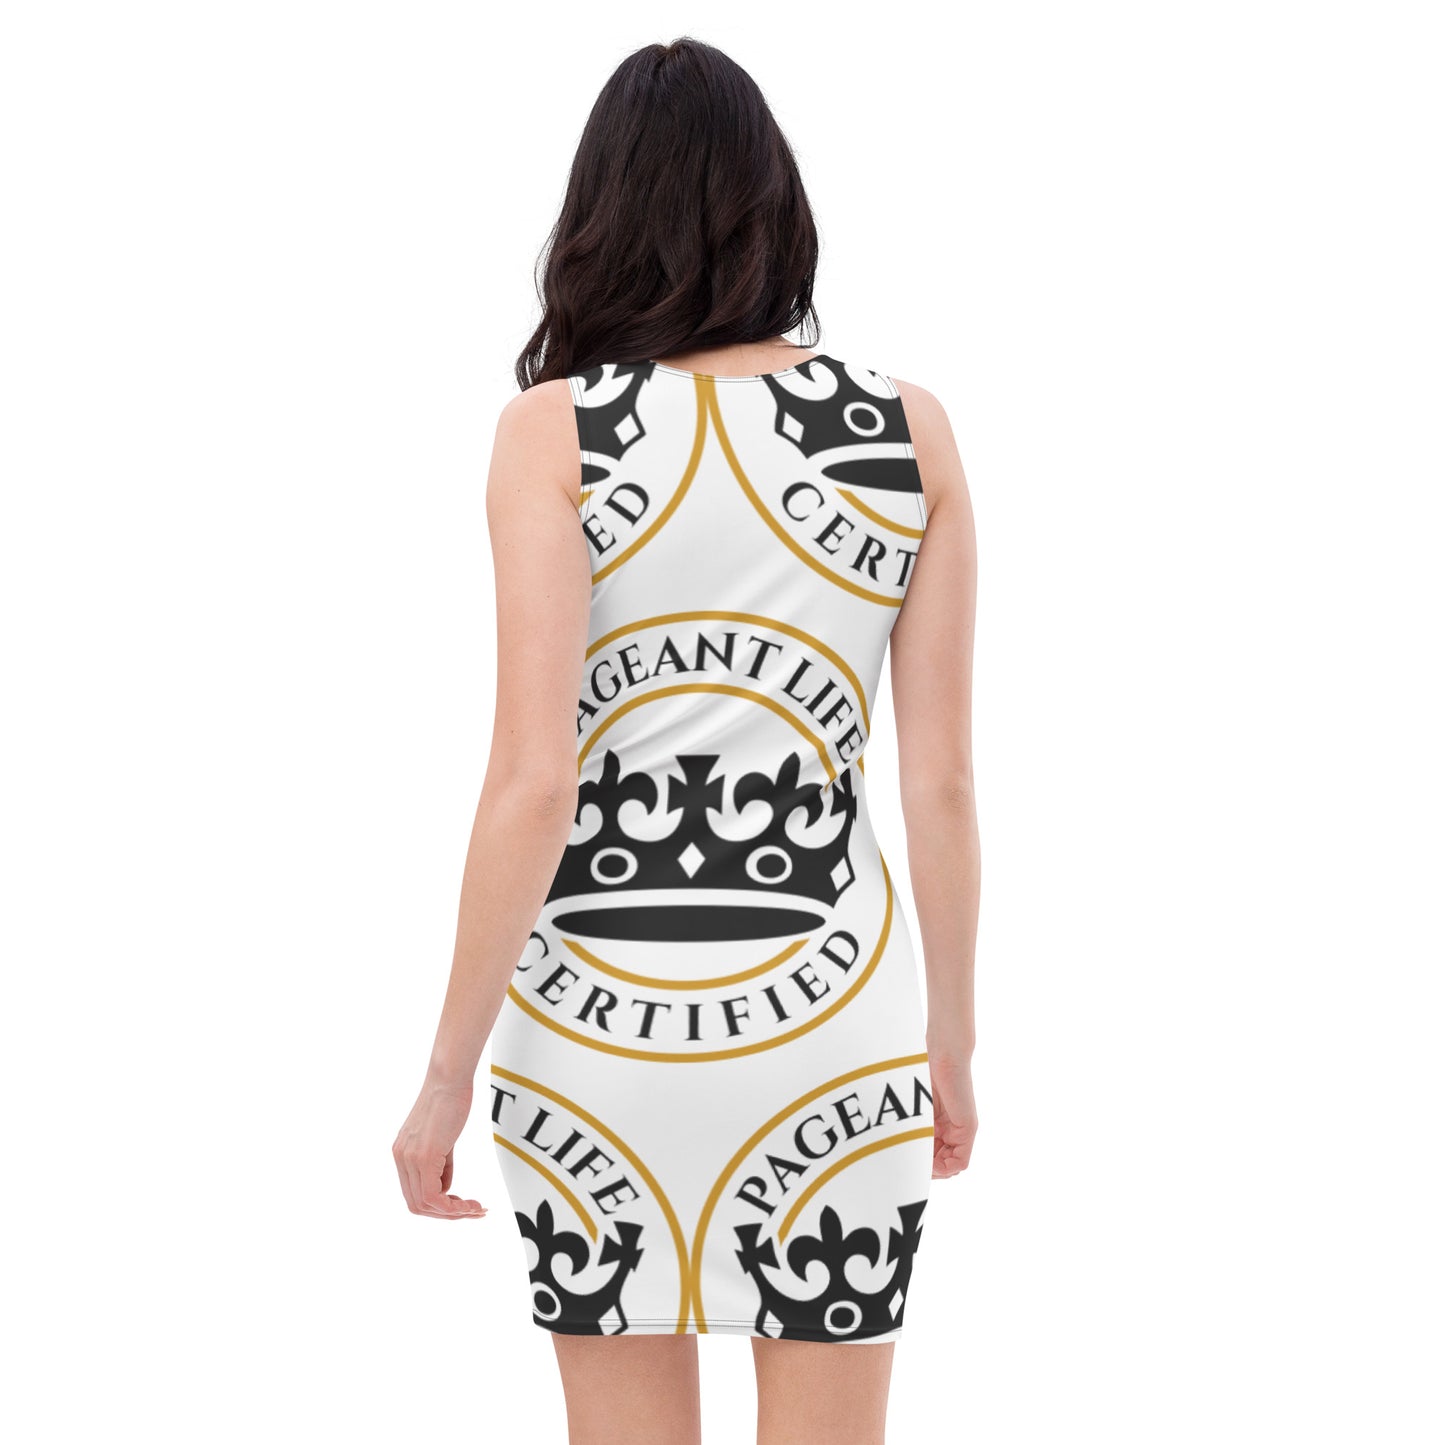 Black and Gold/White Pageant Life Certified Dress